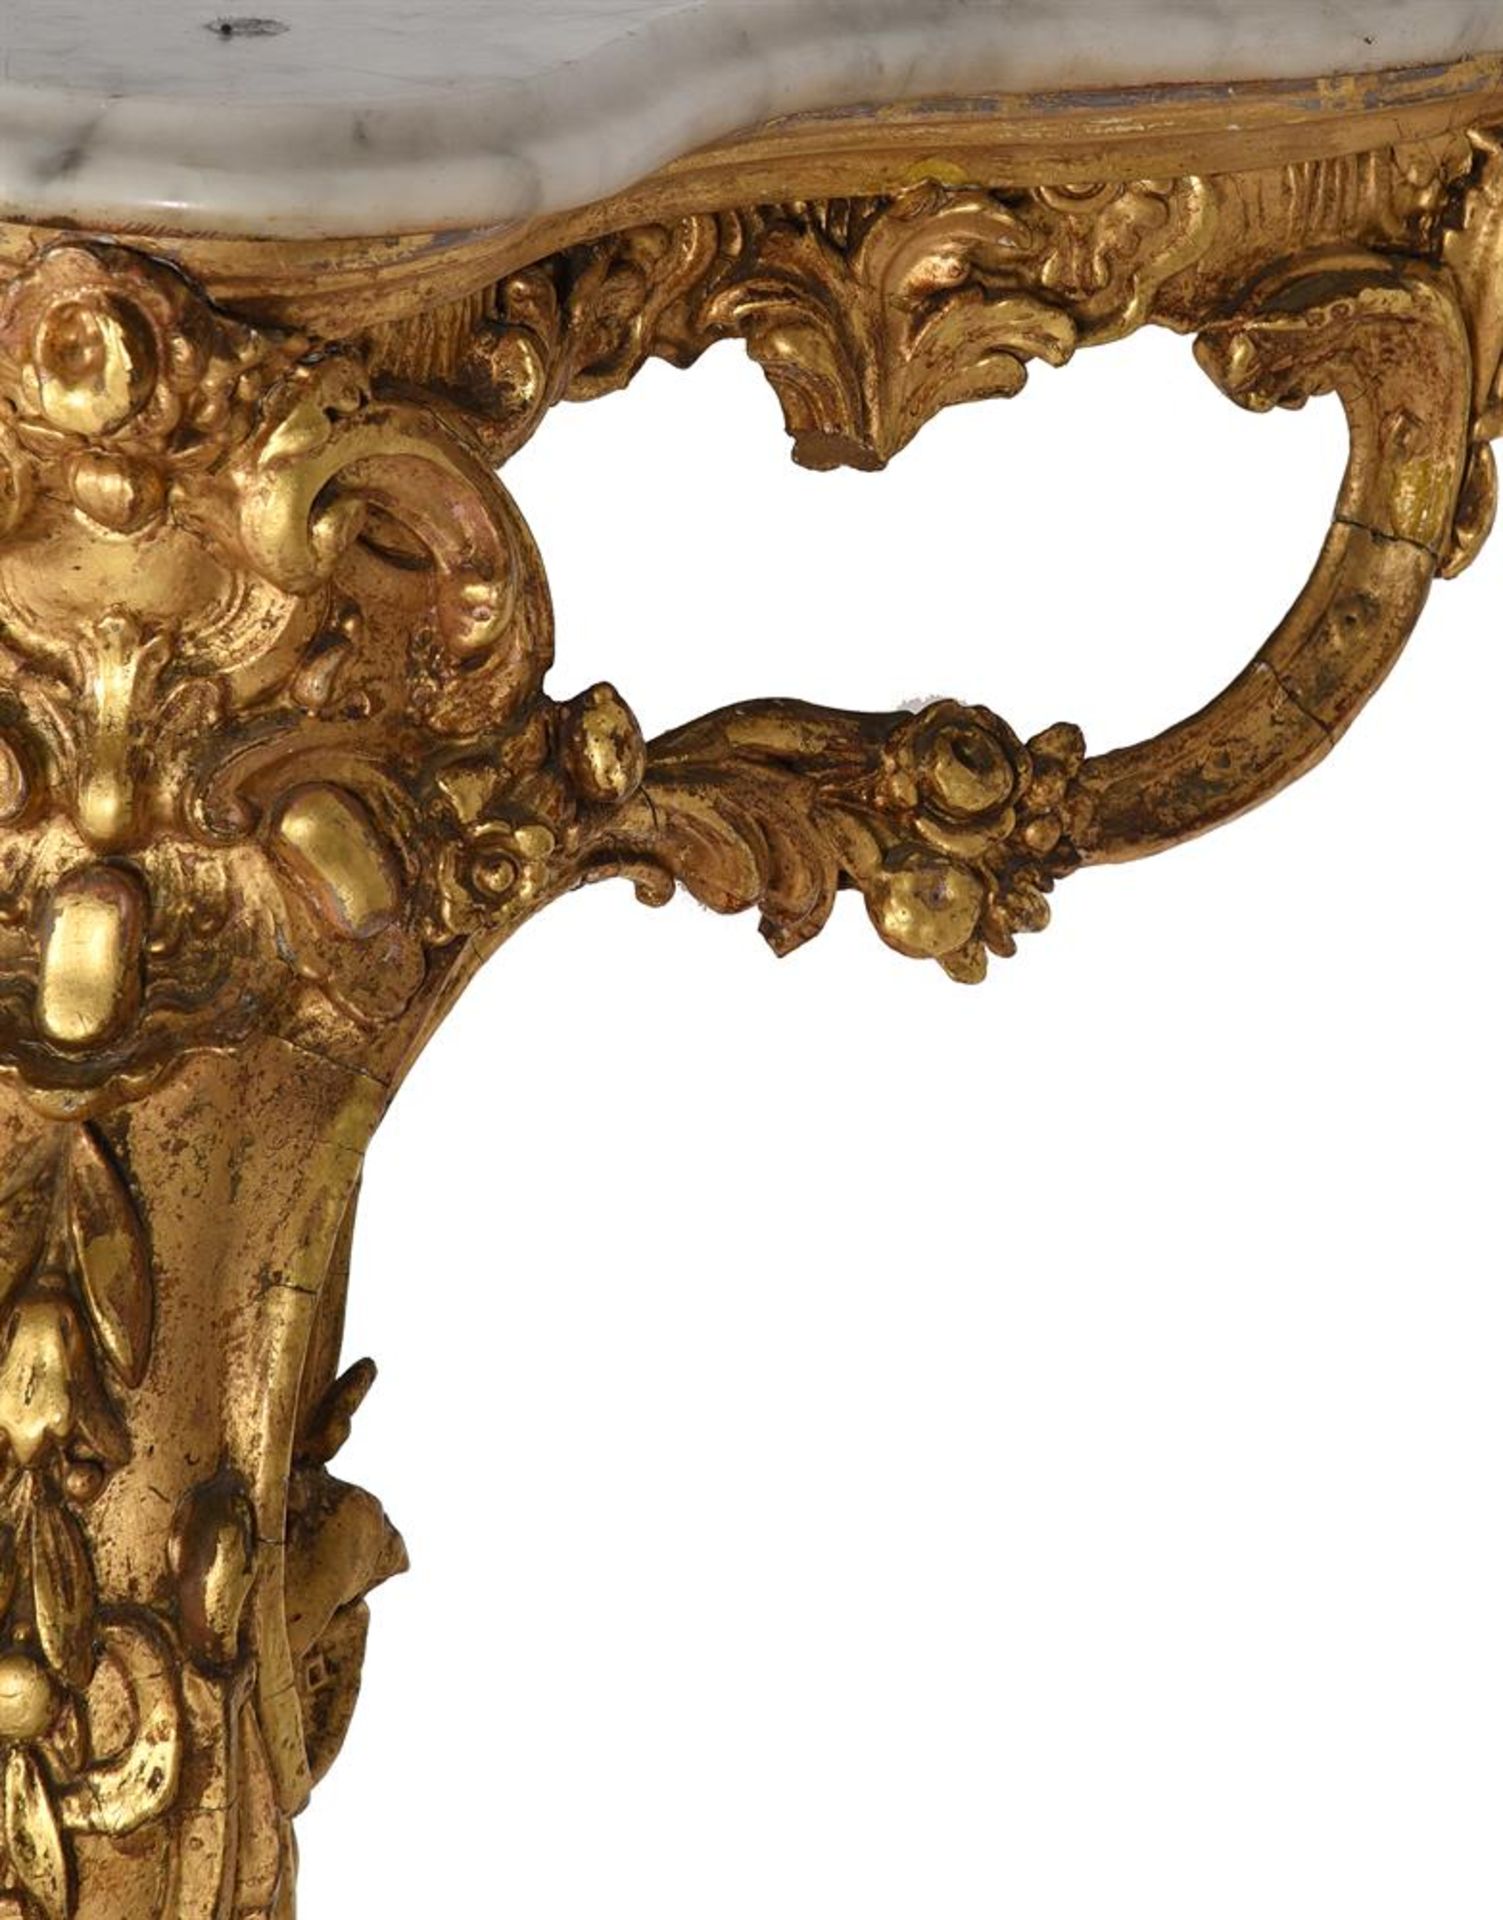 A PAIR OF GILTWOOD AND COMPOSITION CONSOLE TABLES, IN ROCOCO REVIVAL TASTE, 19TH CENTURY - Image 11 of 13